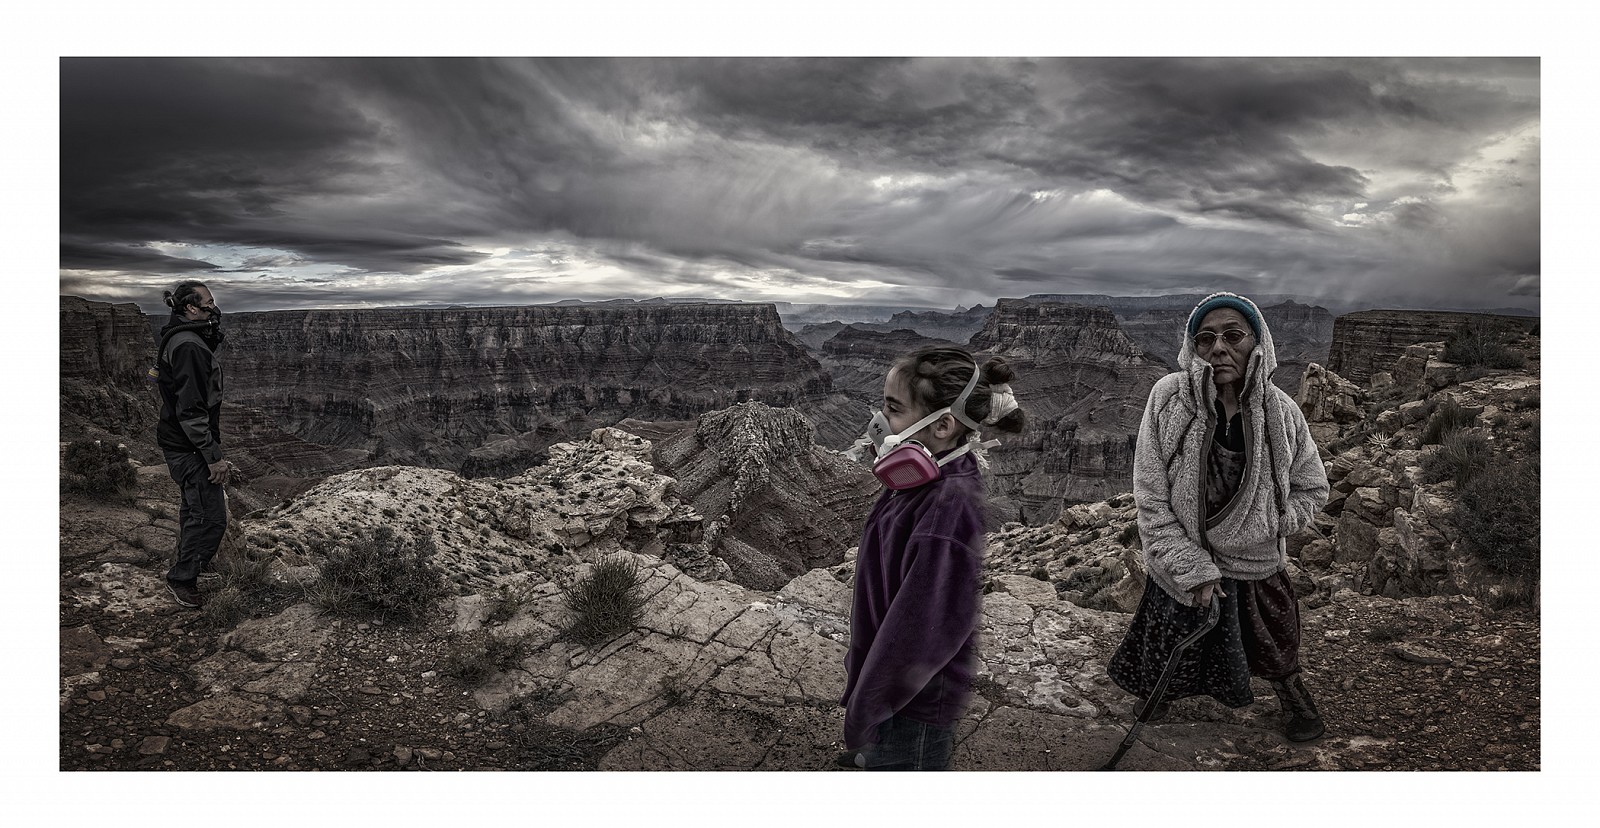 Will Wilson
Auto Immune Response: Three Generations at a Confluence, 2015
archival pigment print, 44 x 85 in.